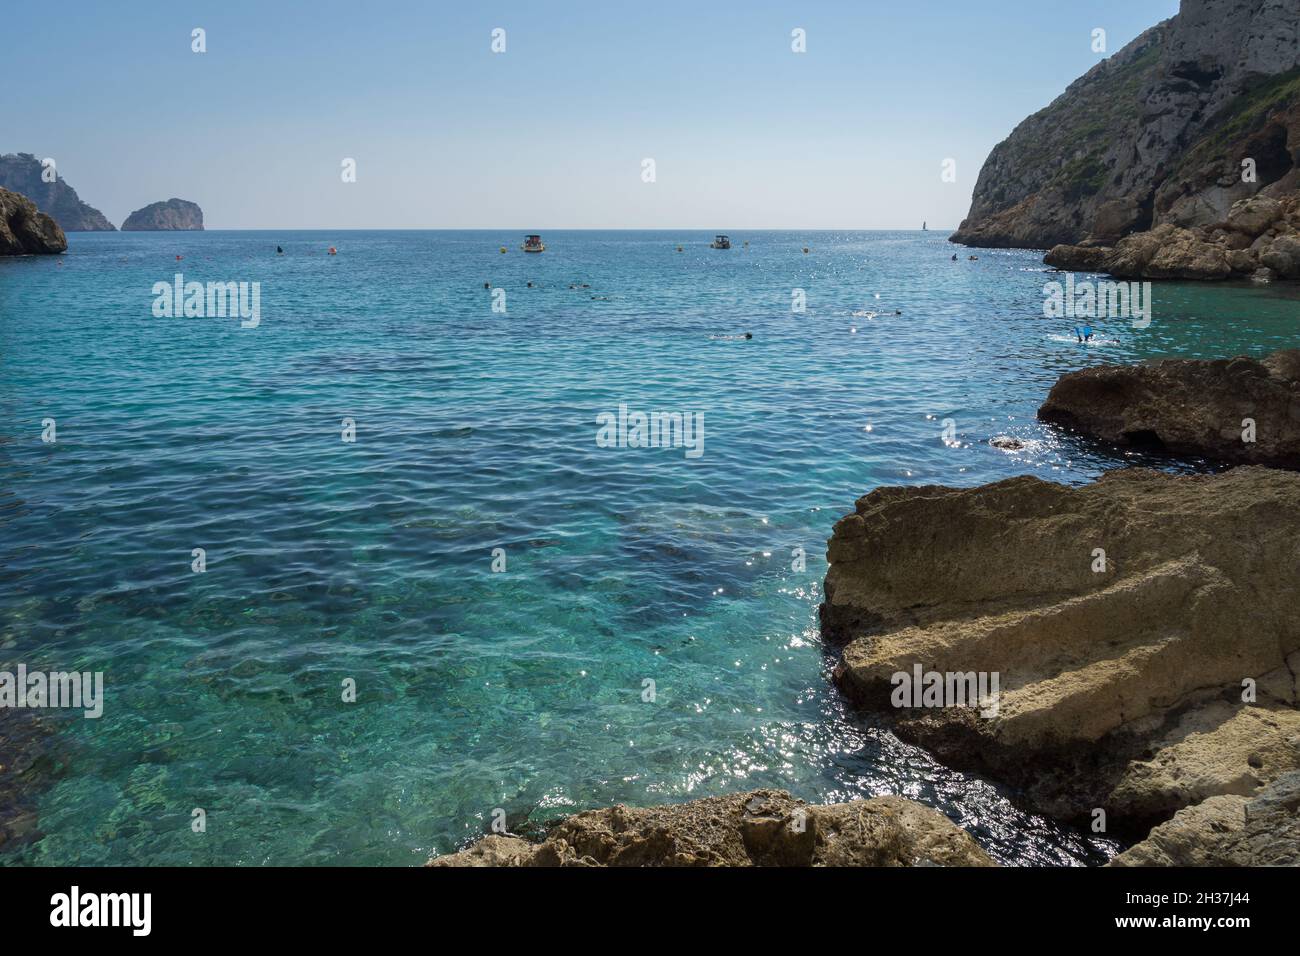 clear turquoise blue water and cliffs in a beautiful bay on the Mediterranean coast in Spain Stock Photo